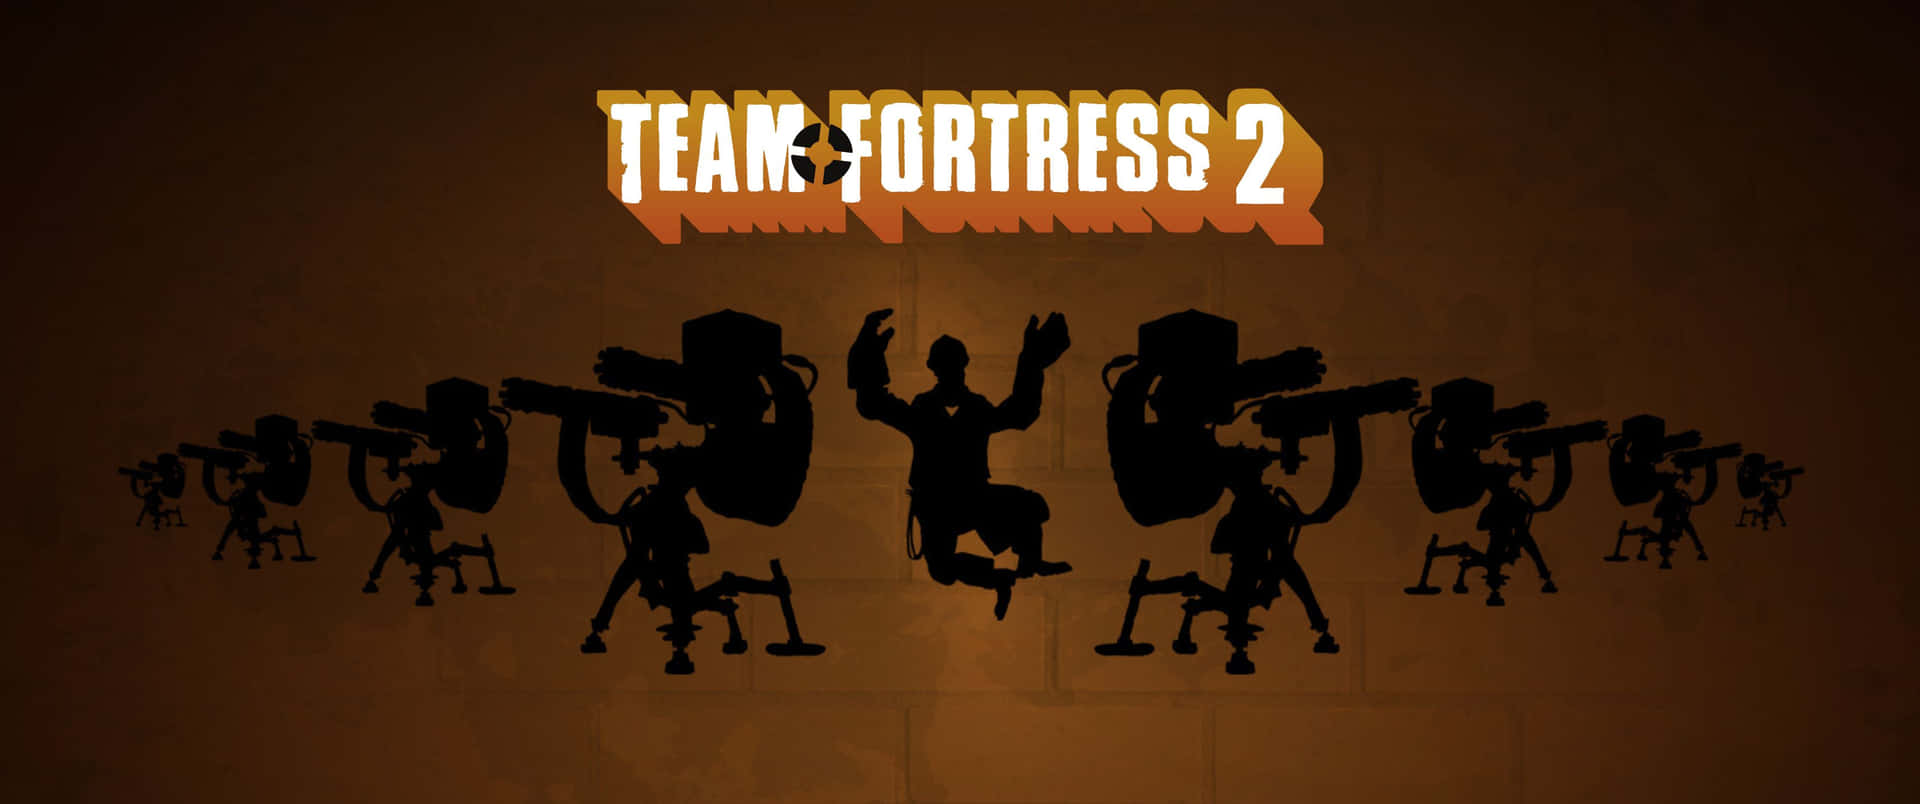 Team Fortress 2: Ultrawide Gaming at its Finest